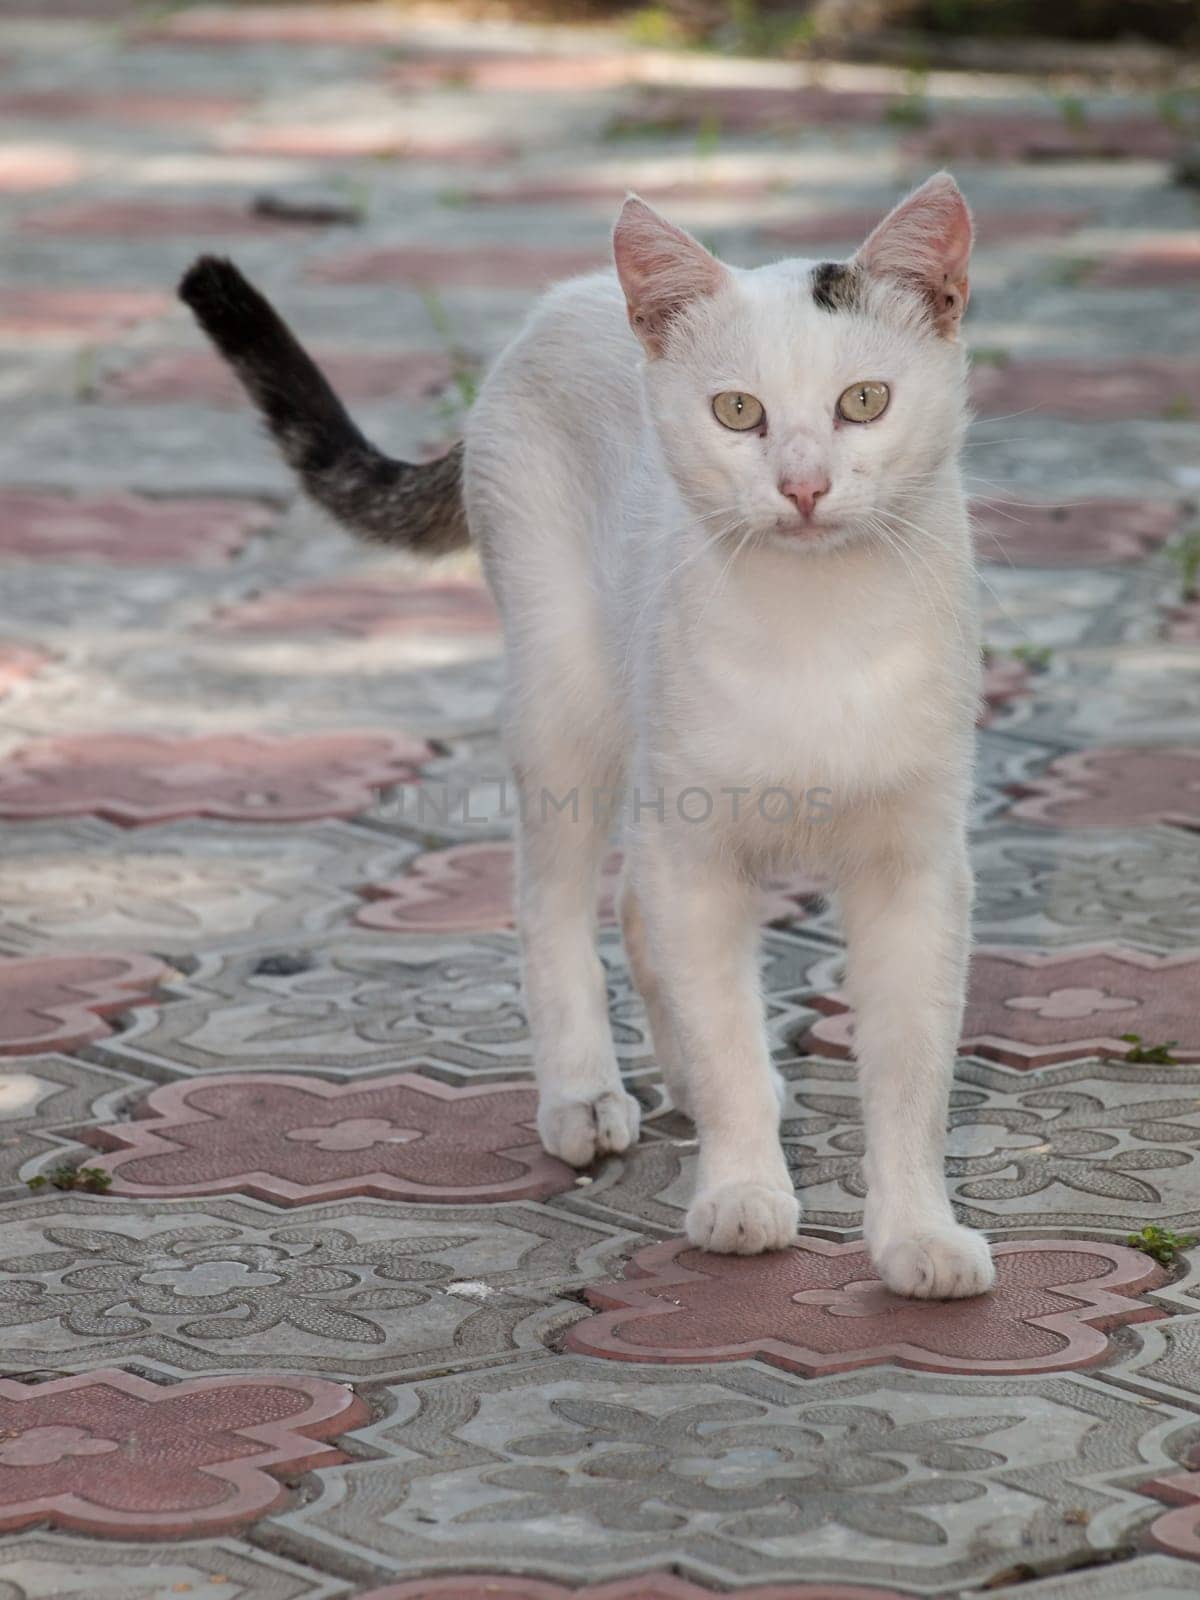 White cat walking in the yard on a tiled pavement in summer day.